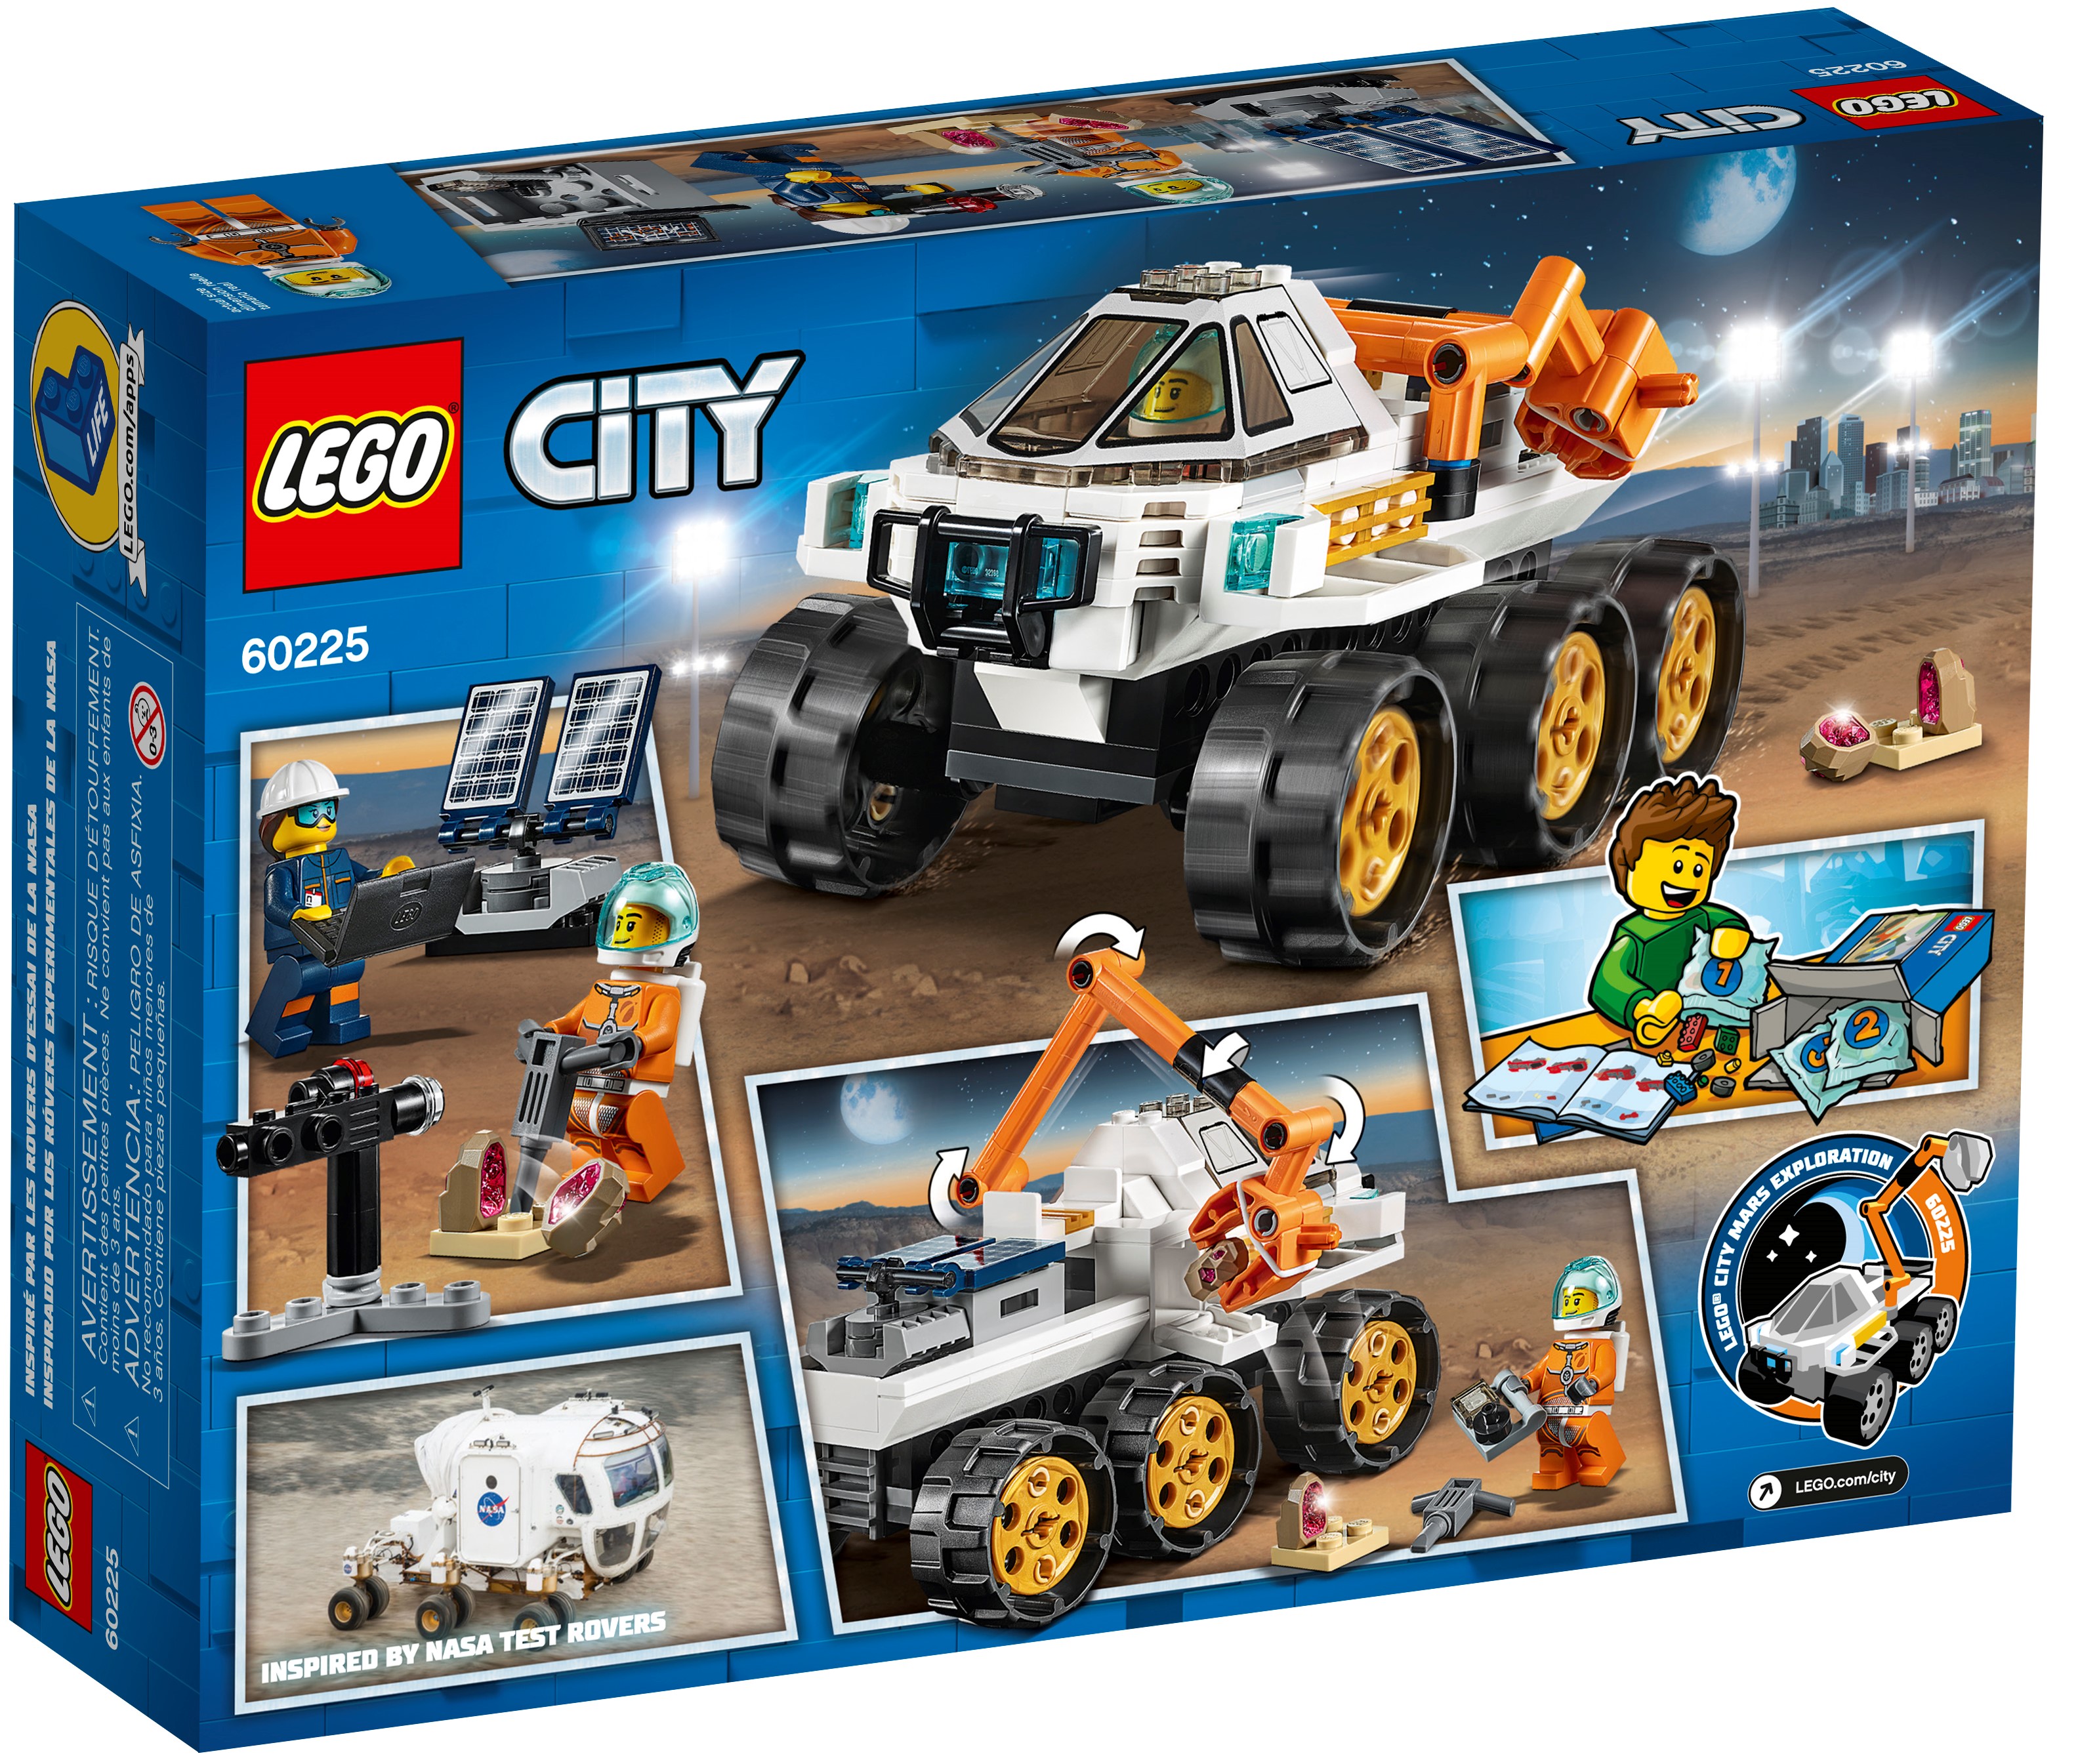 Rover Testing Drive 60225 City Buy Online At The Official Lego